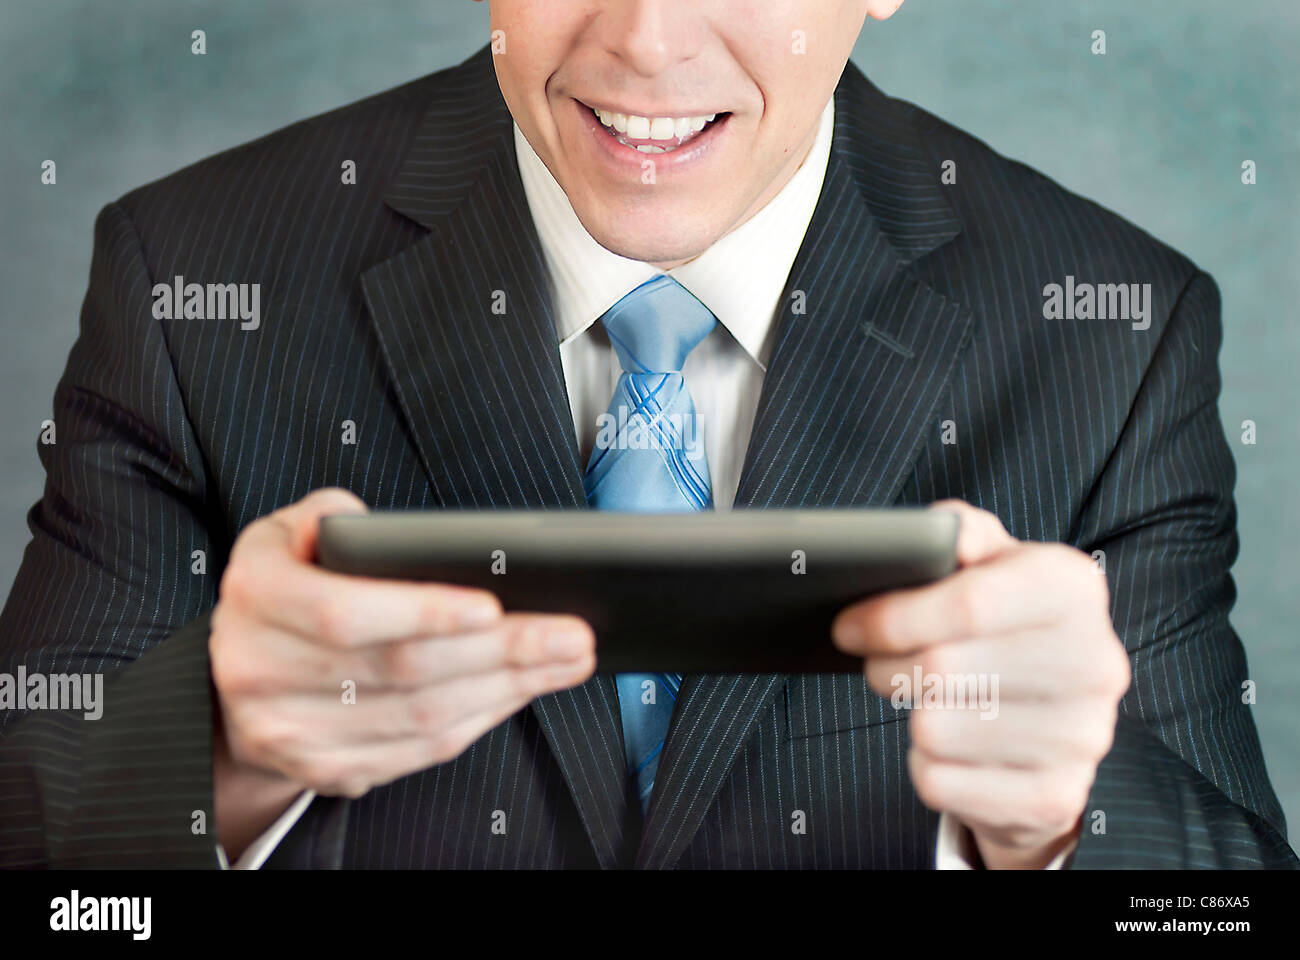 A close-up shot of a businessman looking at a tablet computer with excitement. Stock Photo